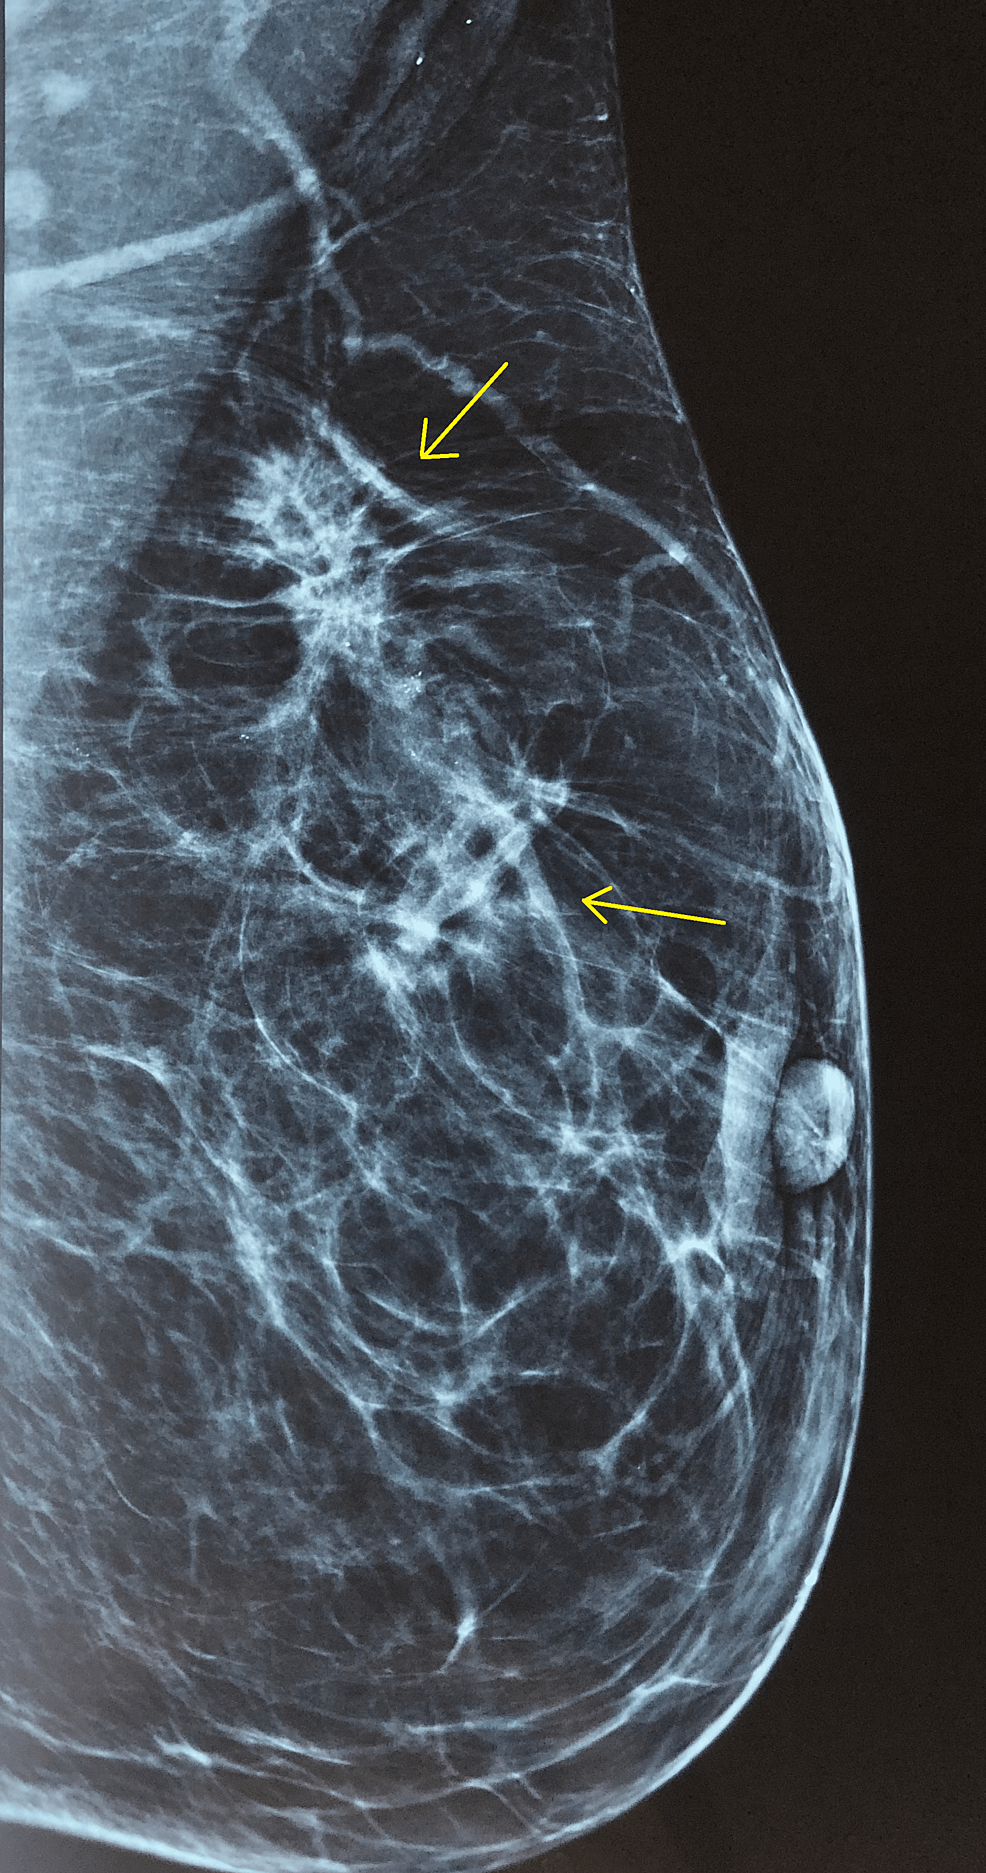 The left mammogram revealed-an-irregular-shape-nodule-with-measurements-of-24×13mm-in-the-upper-outer-quadrant-of-the-left-breast-and-another-nodule - Measurement-12×10mm-at-junction-of-upper-quadrants-(yellow arrows).